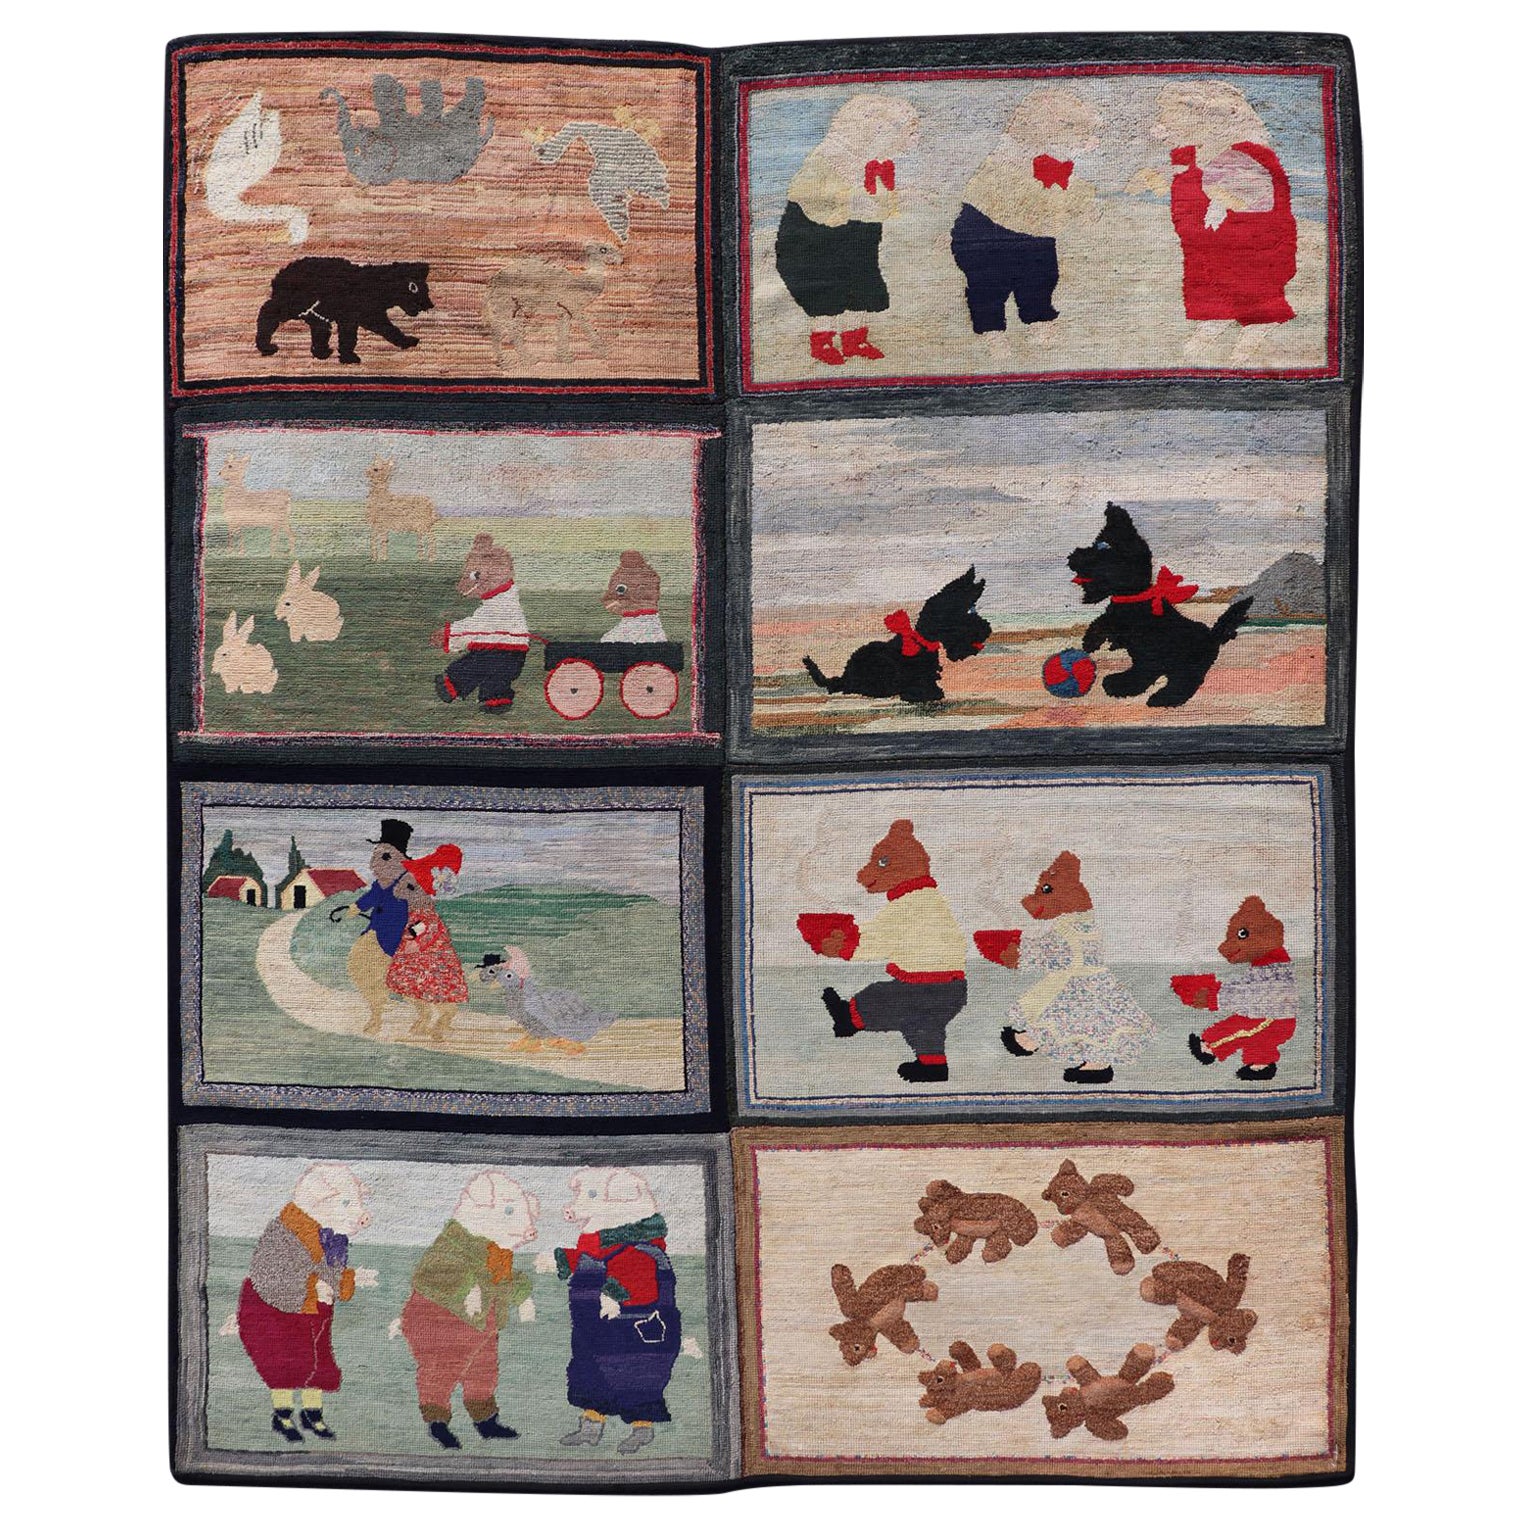 Antique American Hooked Rug with Panel of Children's Rhymes For Sale